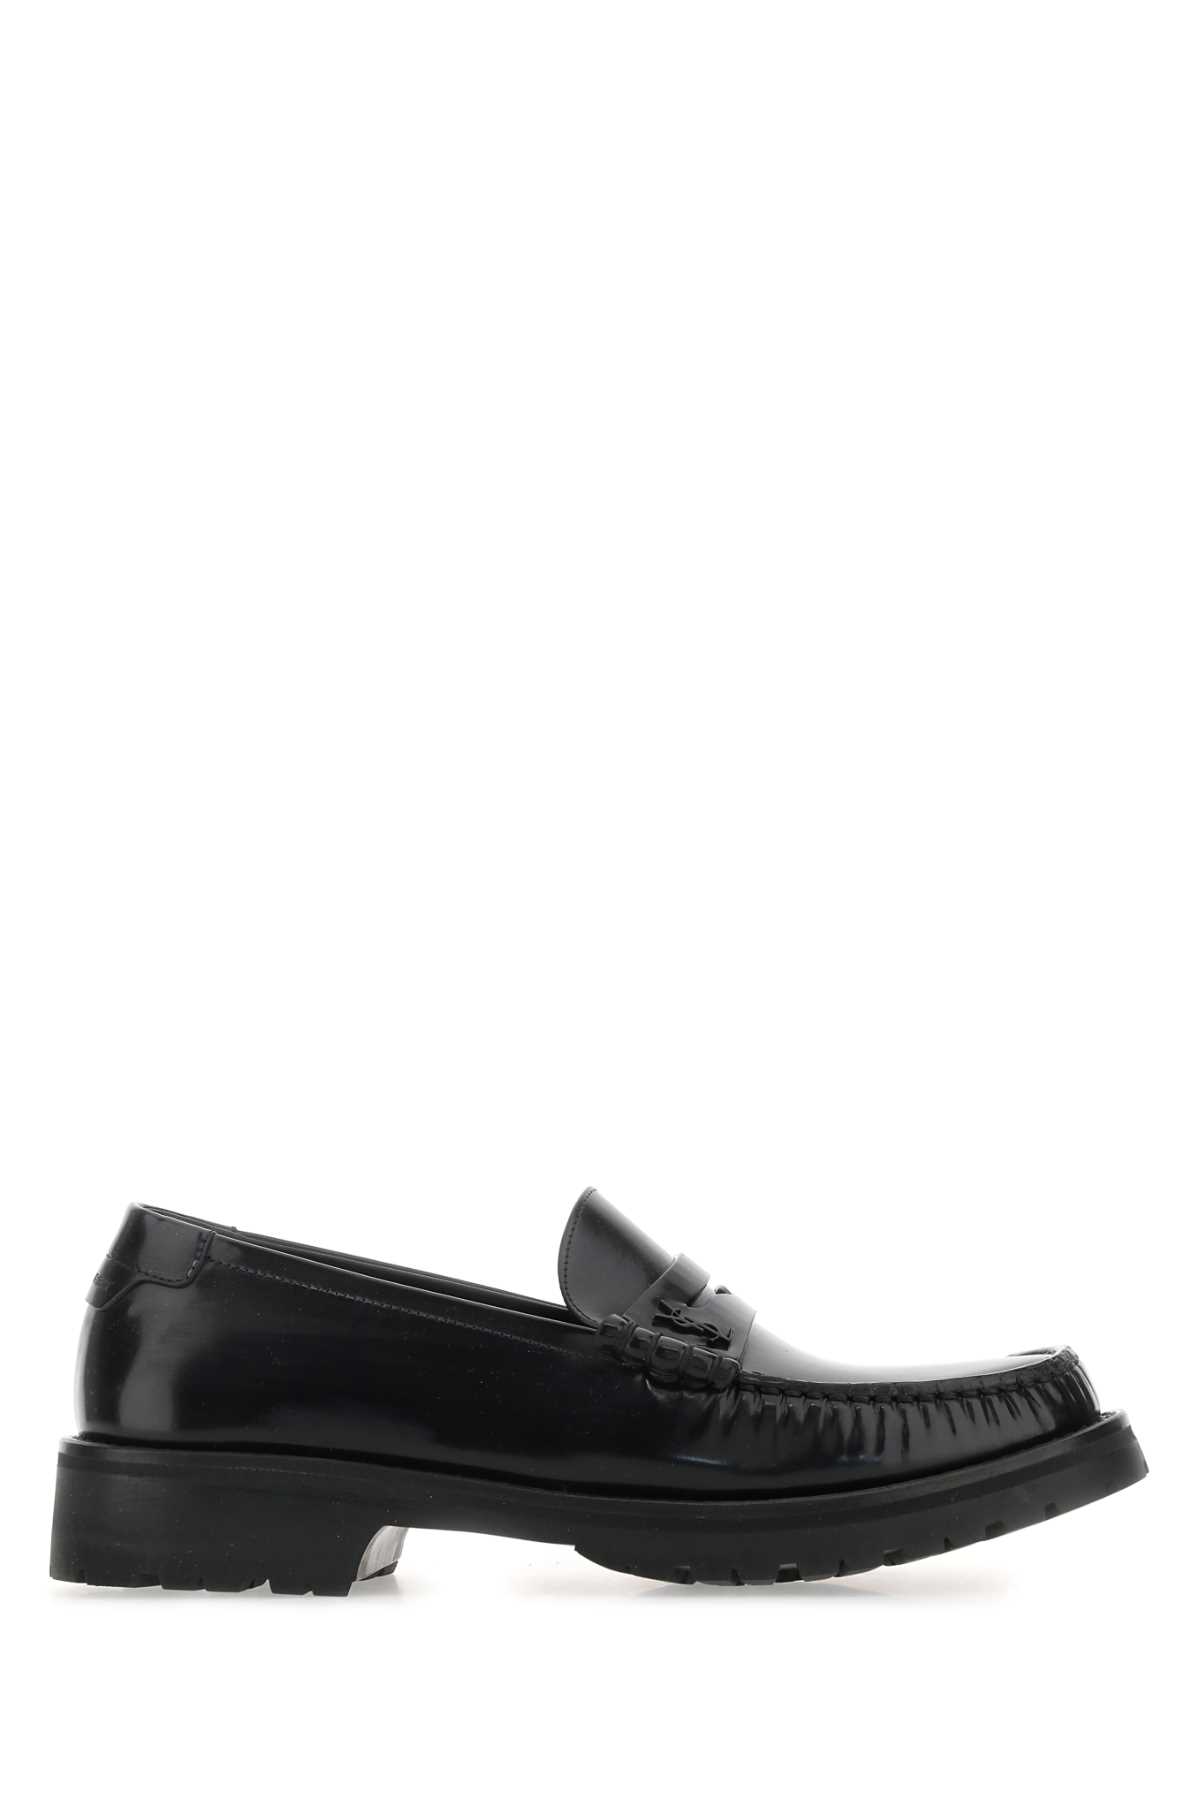 Saint Laurent Black Leather Le Loafers Loafers